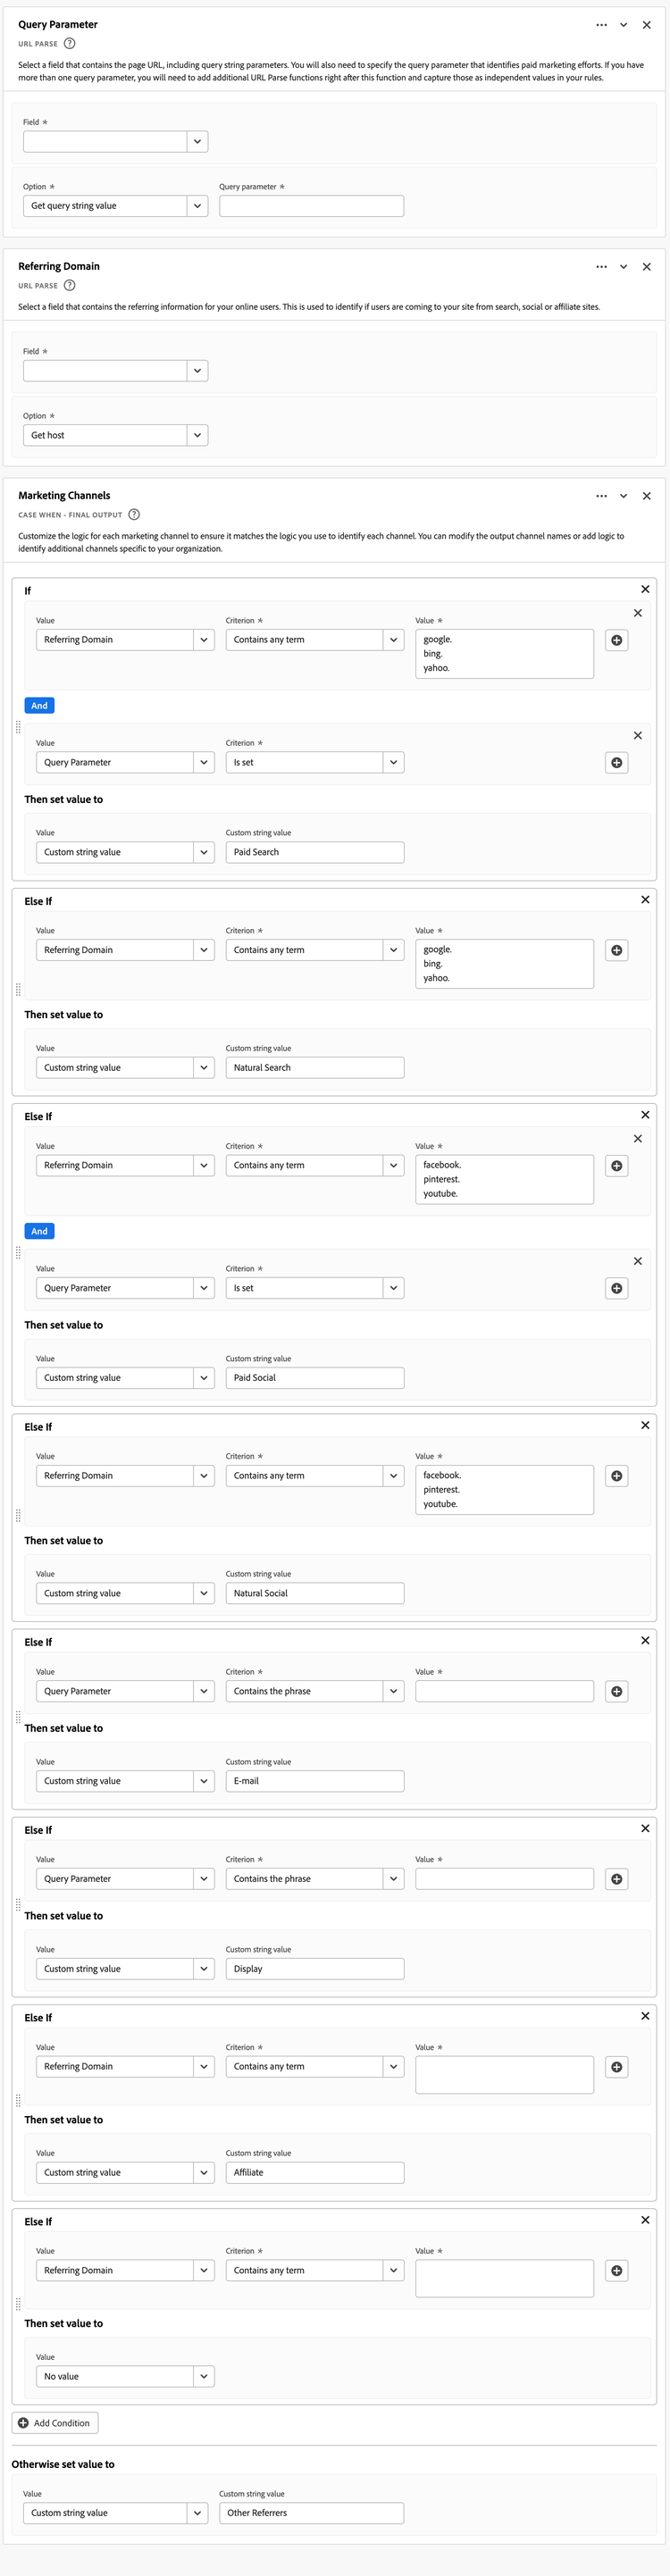 Screenshot of the Marketing channel template rule builder